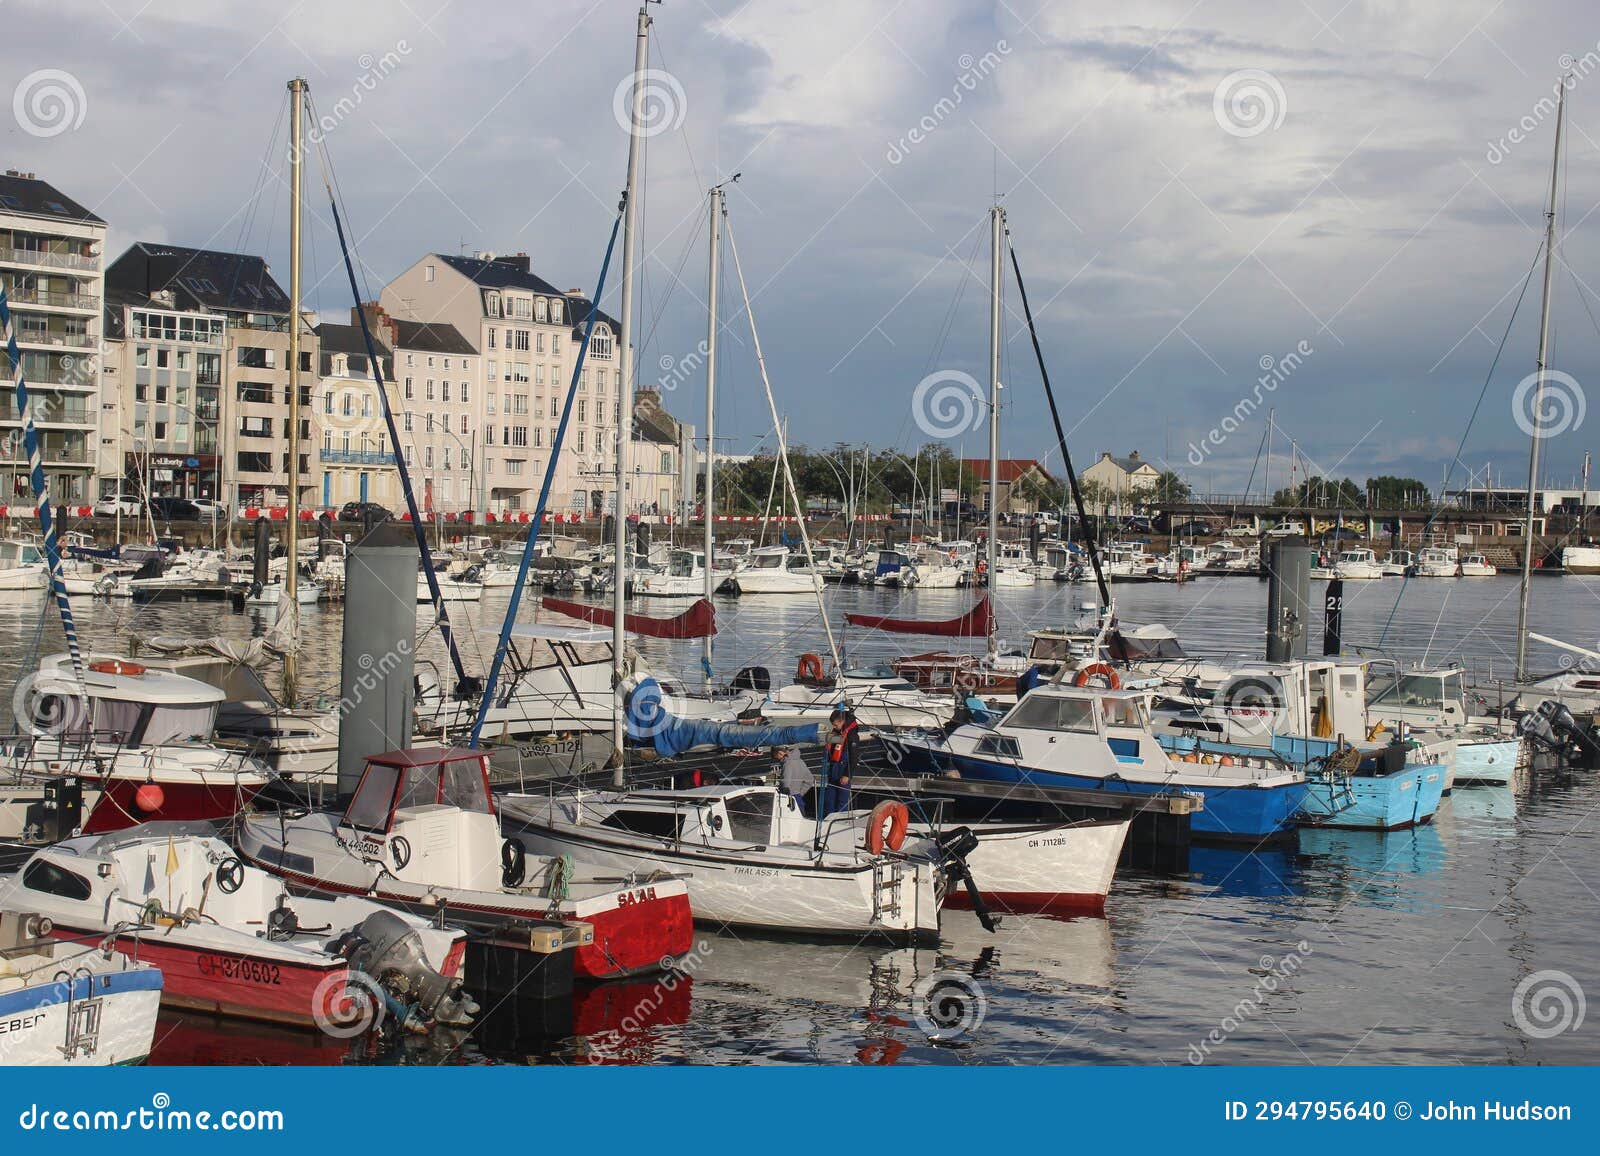 Pleasure Craft and Small Fishing Vessels Moored at Cherbourg